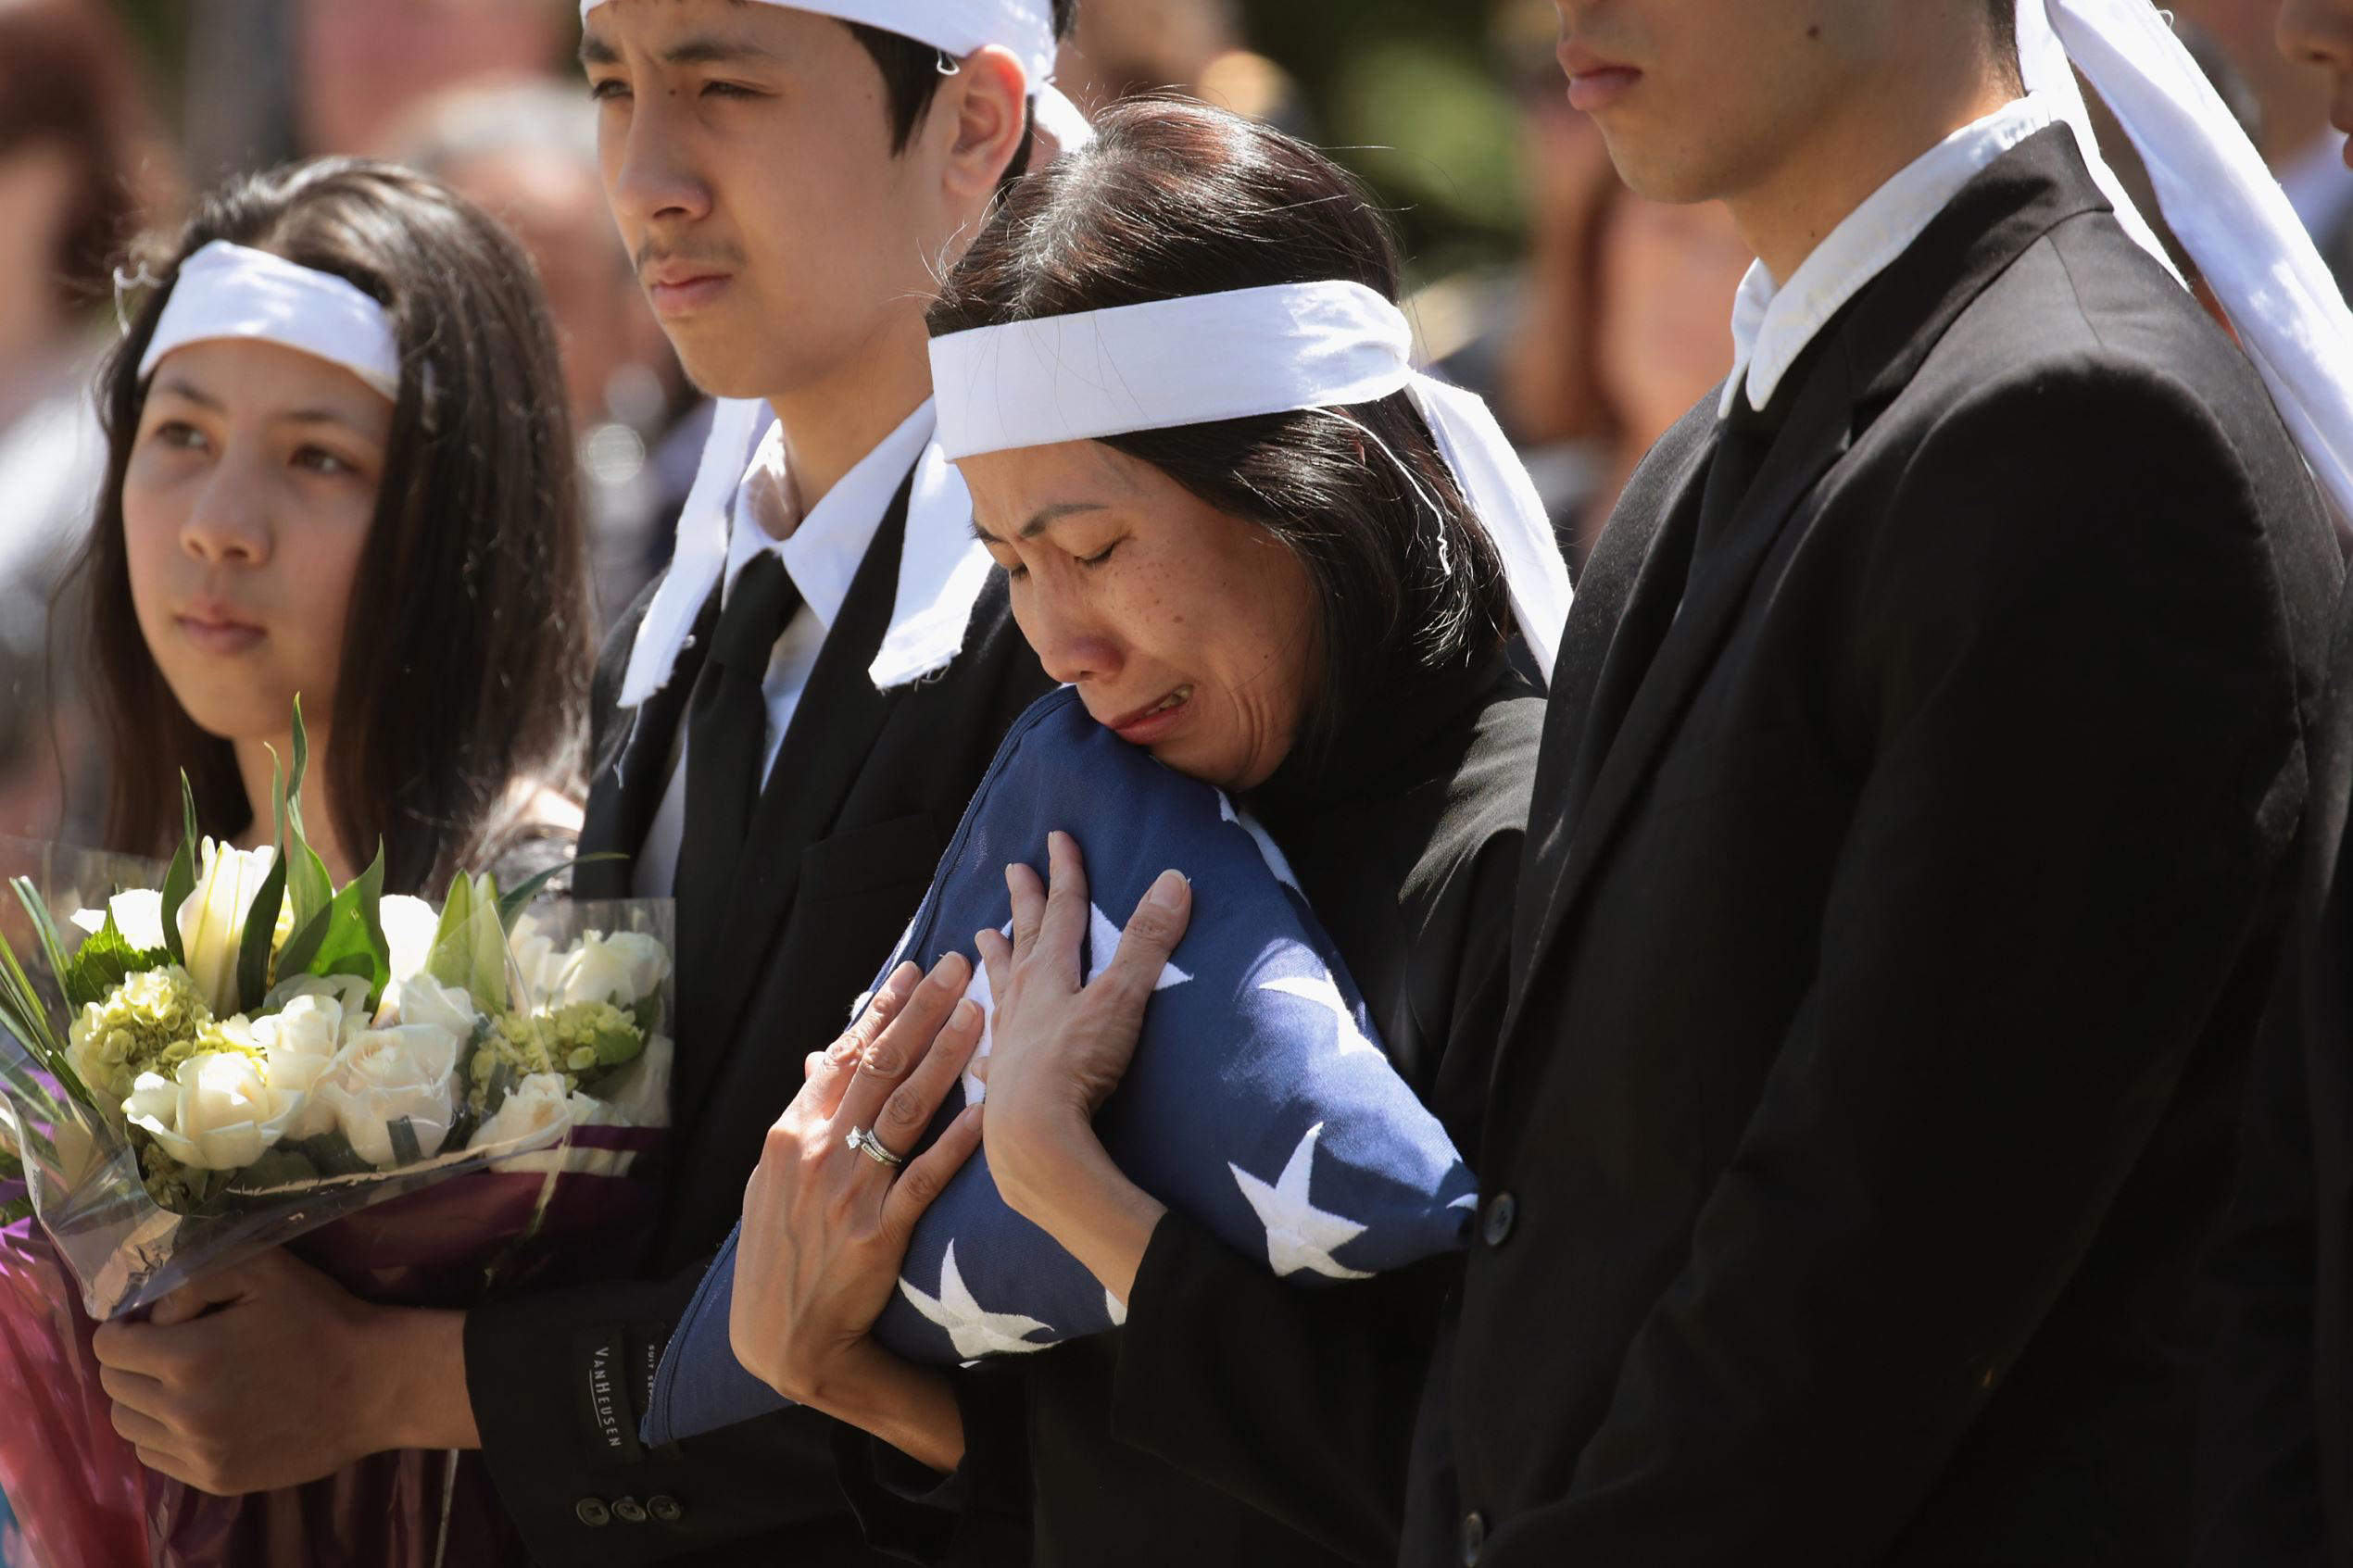 Slide 1 of 99: PORTLAND, OR - JUNE 05: Myhanh Best clutches the flag that draped the casket of her husband Ricky Best, an Army veteran and father of four, during a committal service at Willamette National Cemetery on June 5, 2017 in Portland, Oregon. Ricky Best, 53, and Taliesin Namkai-Meche, 23, were stabbed to death and Micah Fletcher,21, was severely injured after they tried to stop Jeremy Christian from harassing two teenage girls, one of whom was wearing a hijab, with racist taunts as they were riding a MAX commuter train. (Photo by Scott Olson/Getty Images)